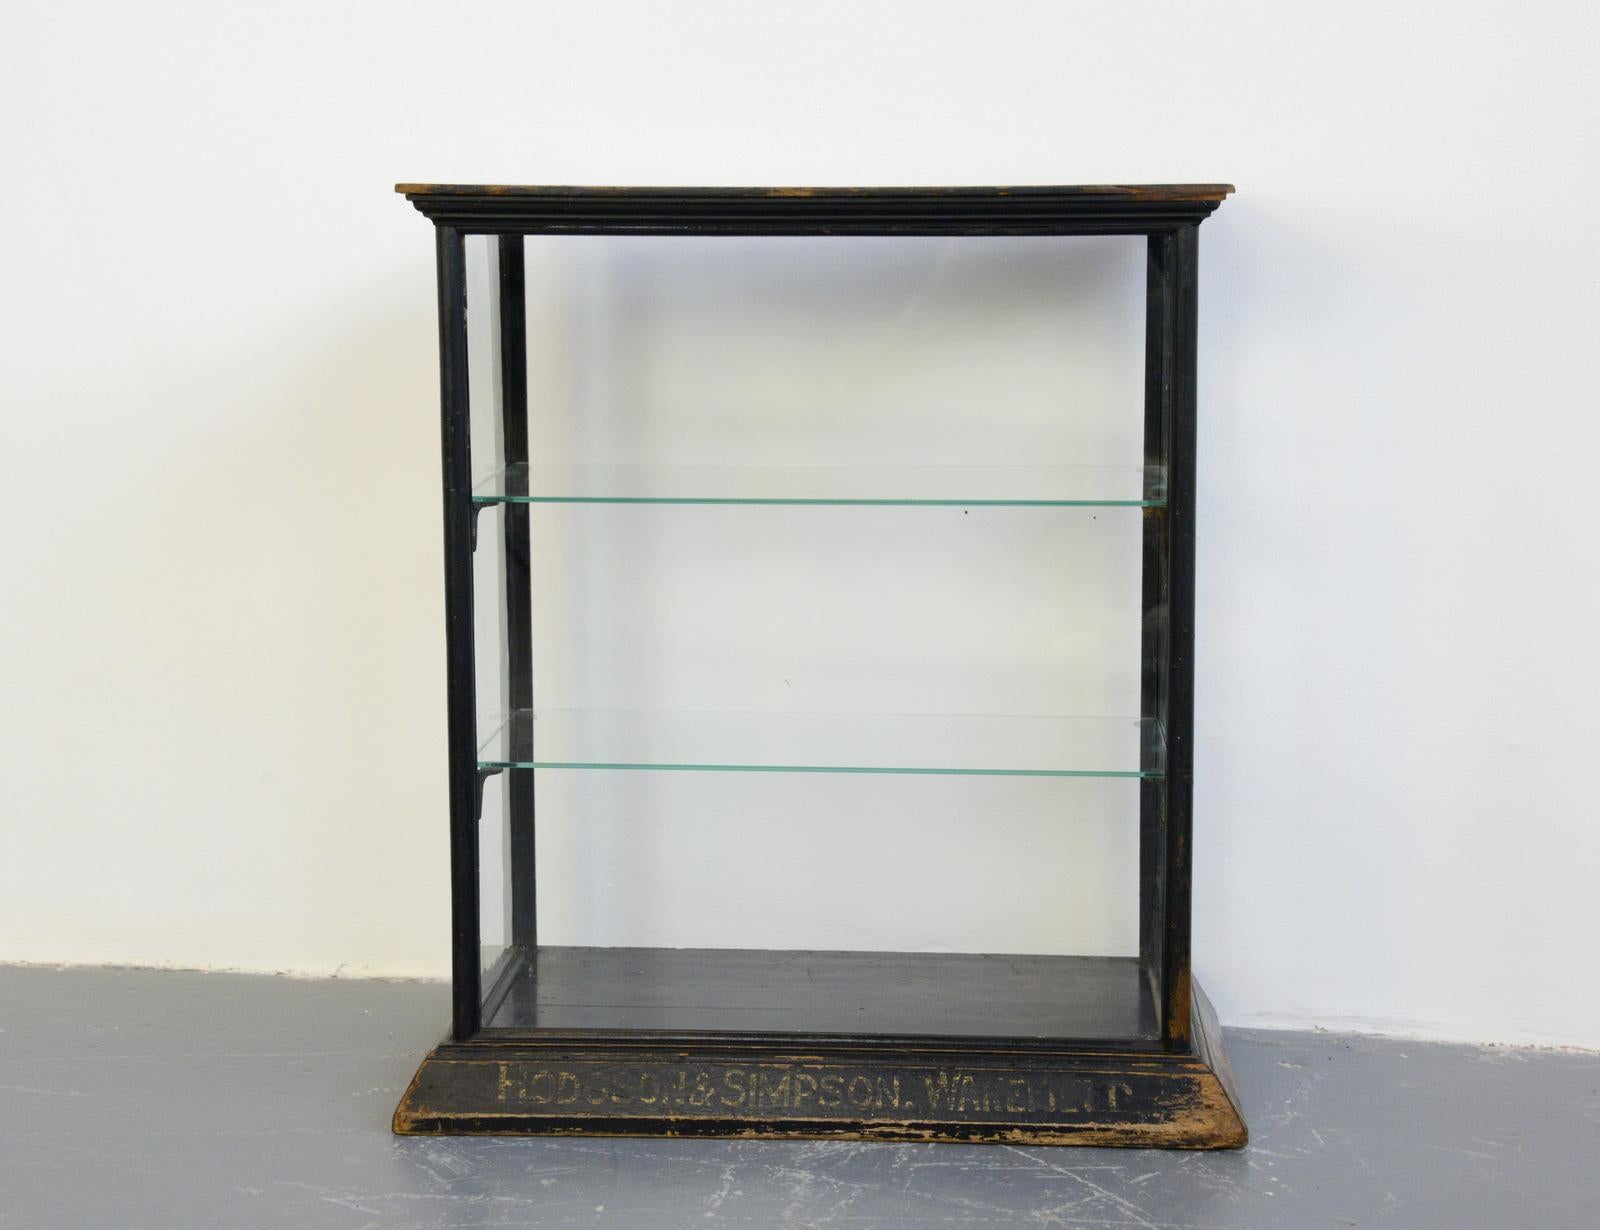 19th century pharmacy display cabinet Hodgson & Simpson soap

- Ebonized oak frame
- Glass windows and shelves
- Would have originally sat on a pharmacy counter to display soap
- Original gold lettering reads 